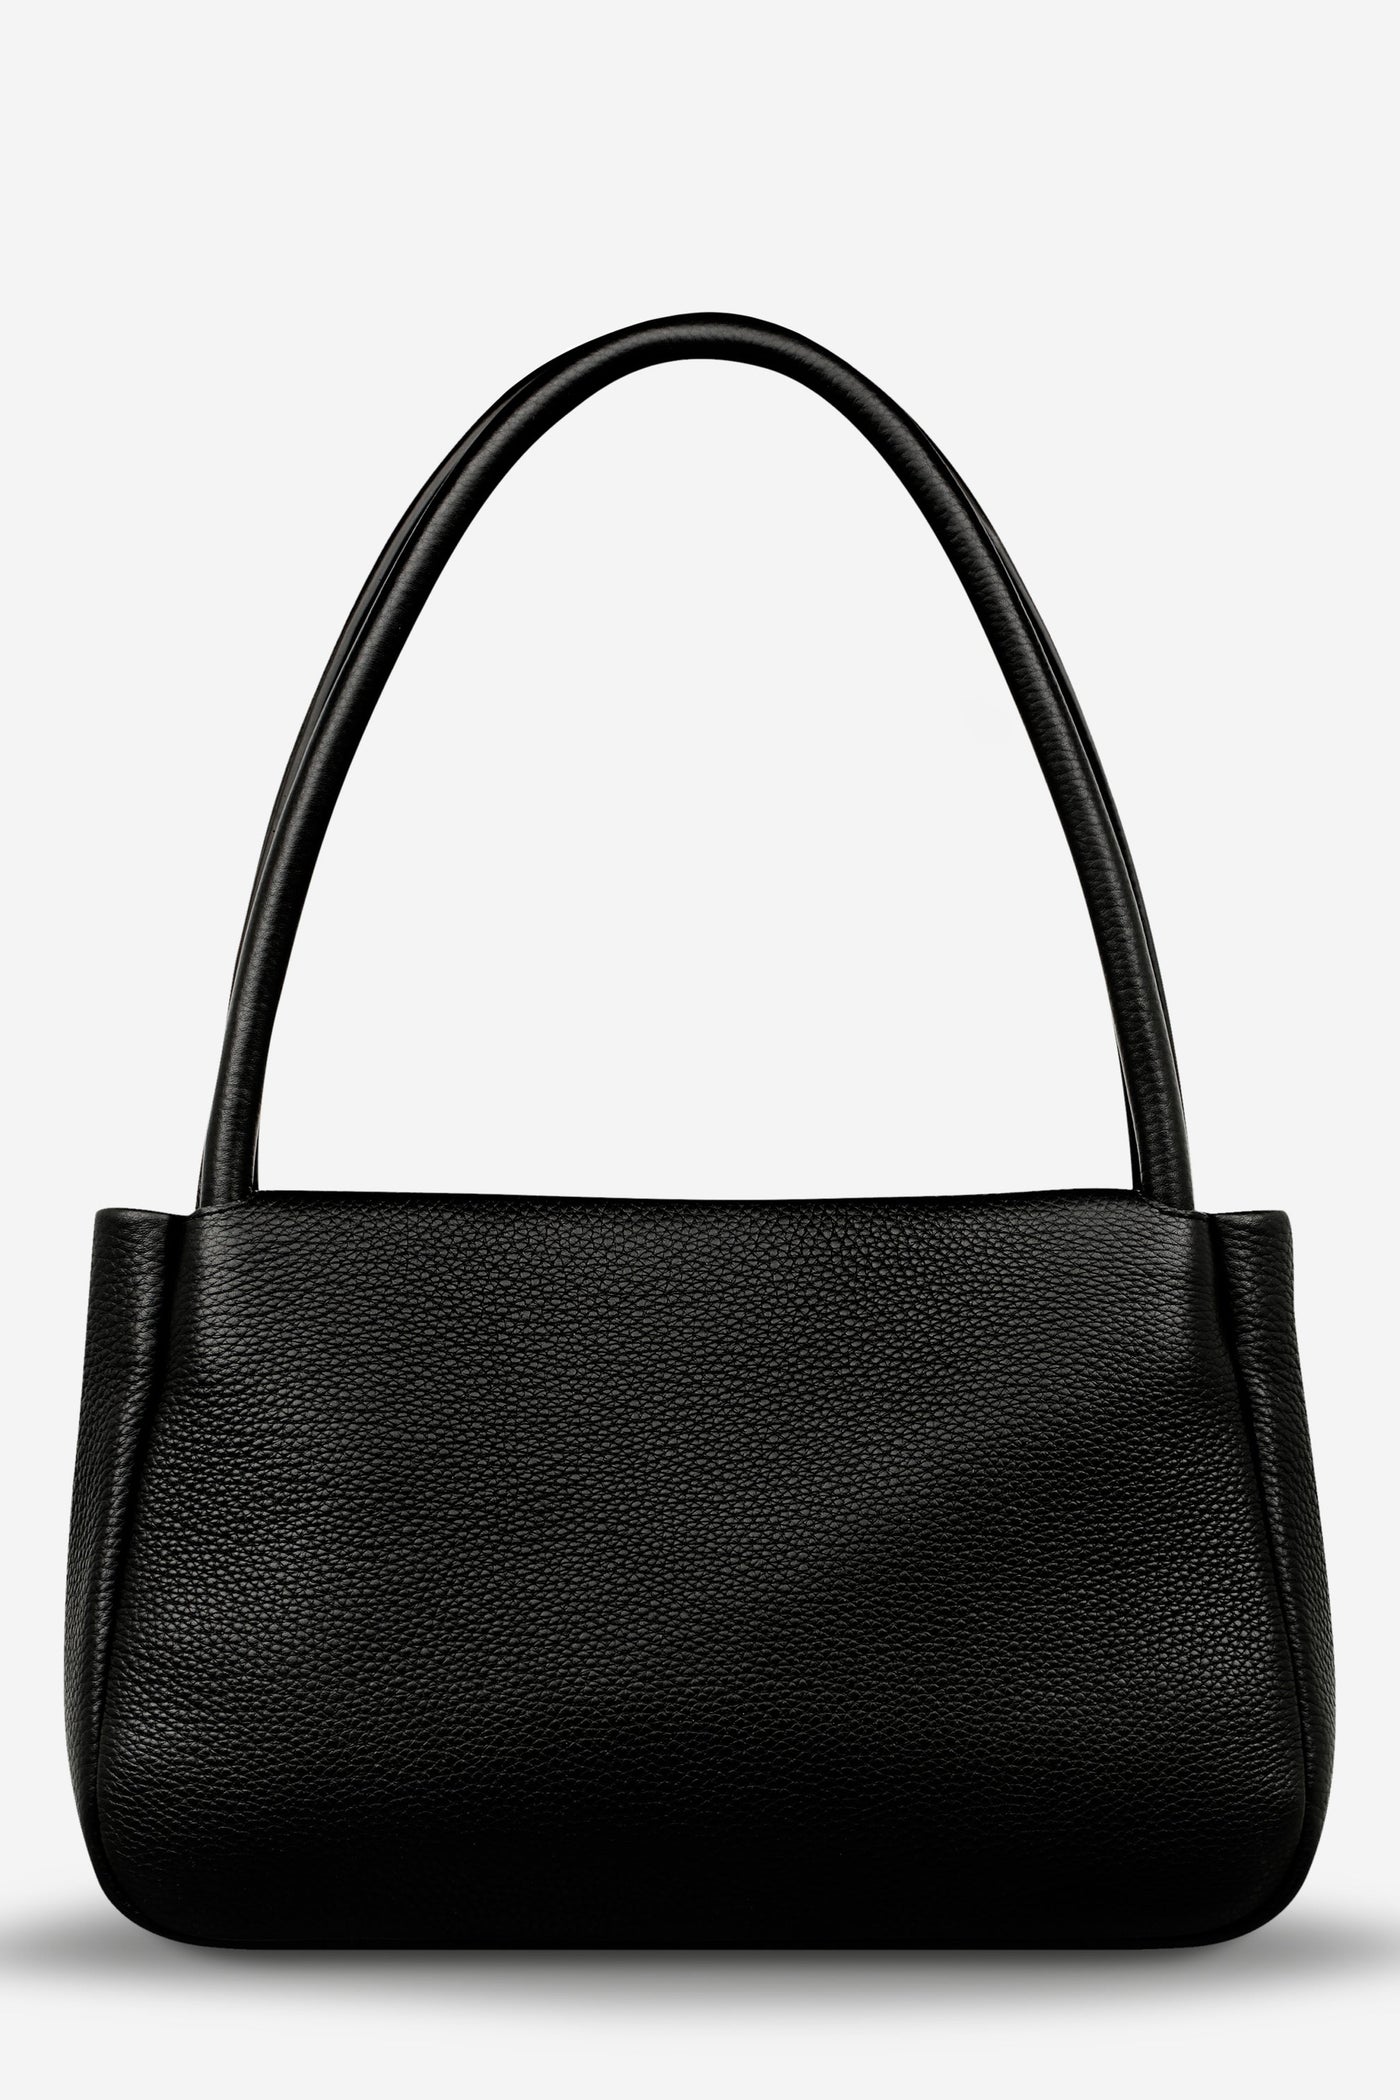 Status Anxiety Light Of Day Bag | Black